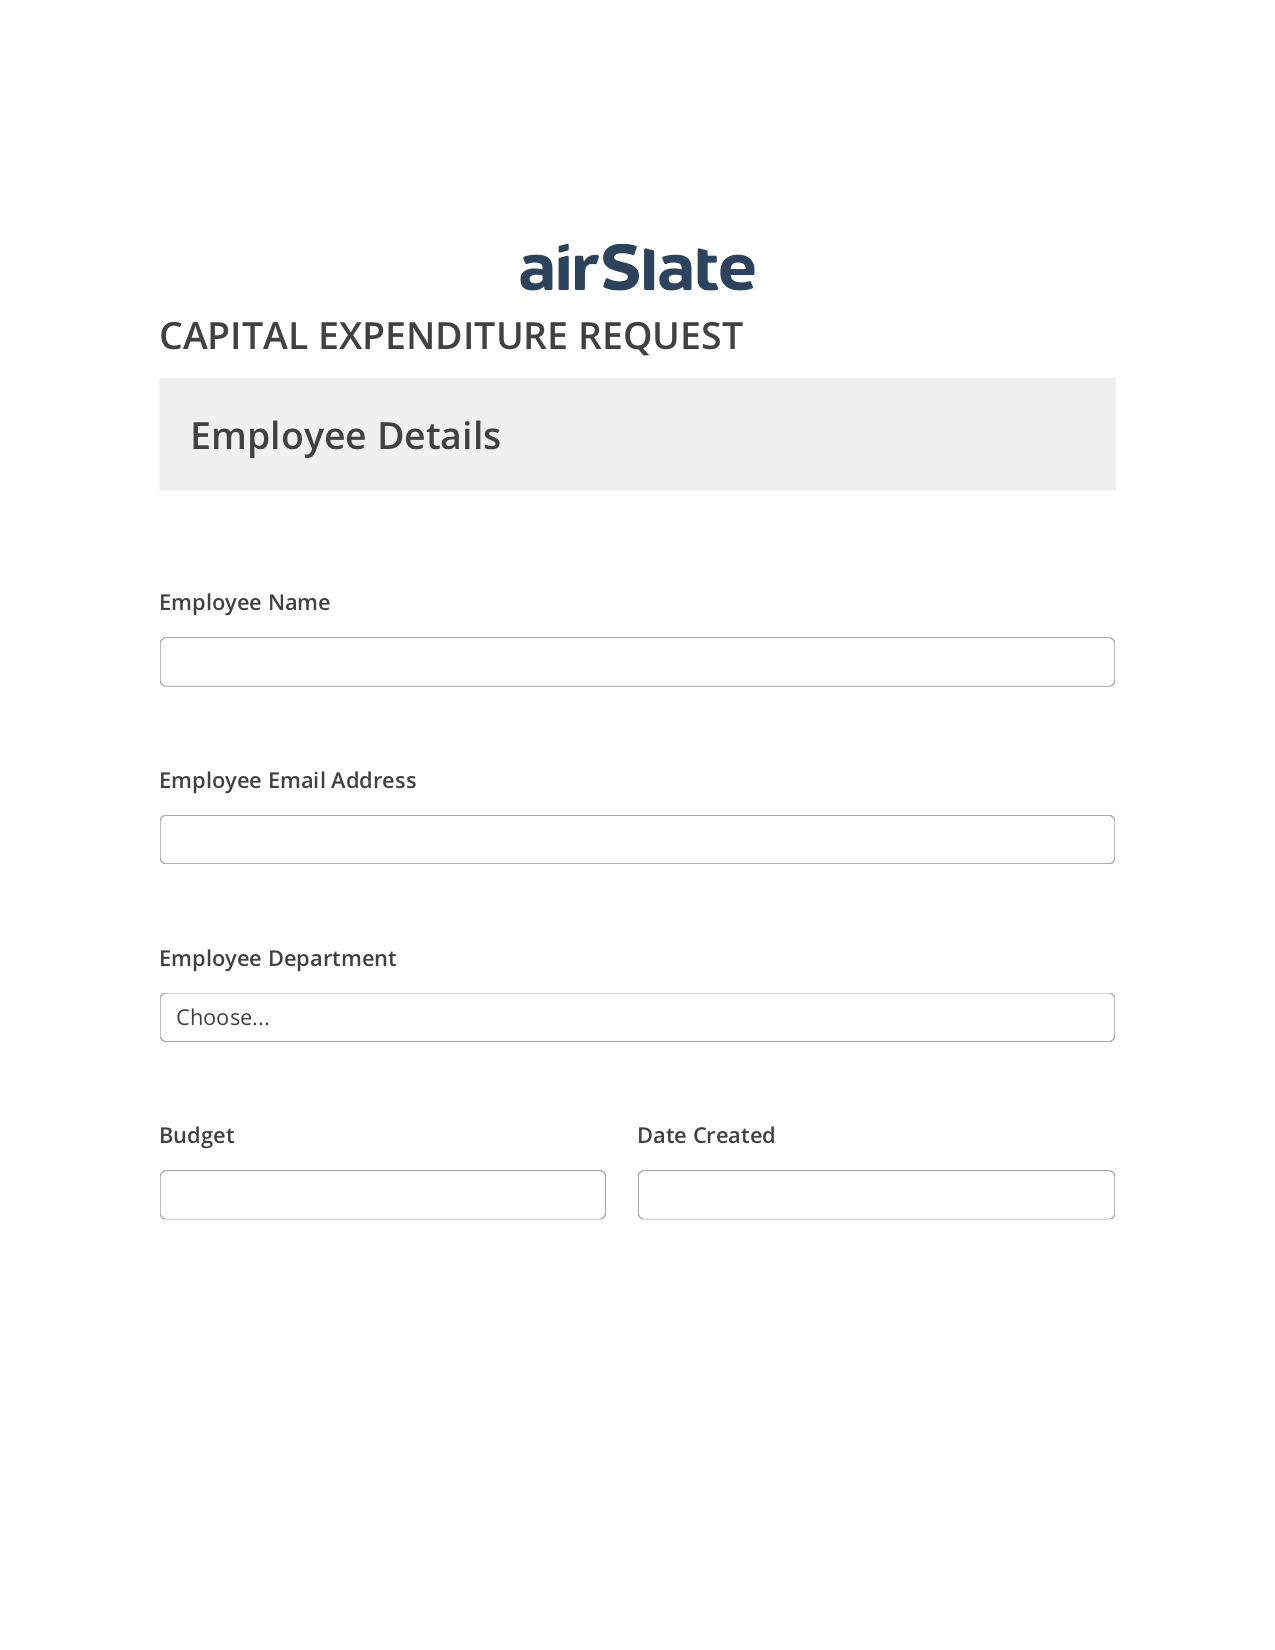 Multirole Capital Expenditure Request Approval Workflow Pre-fill from Salesforce Records with SOQL Bot, Lock the Slate Bot, Archive to SharePoint Folder